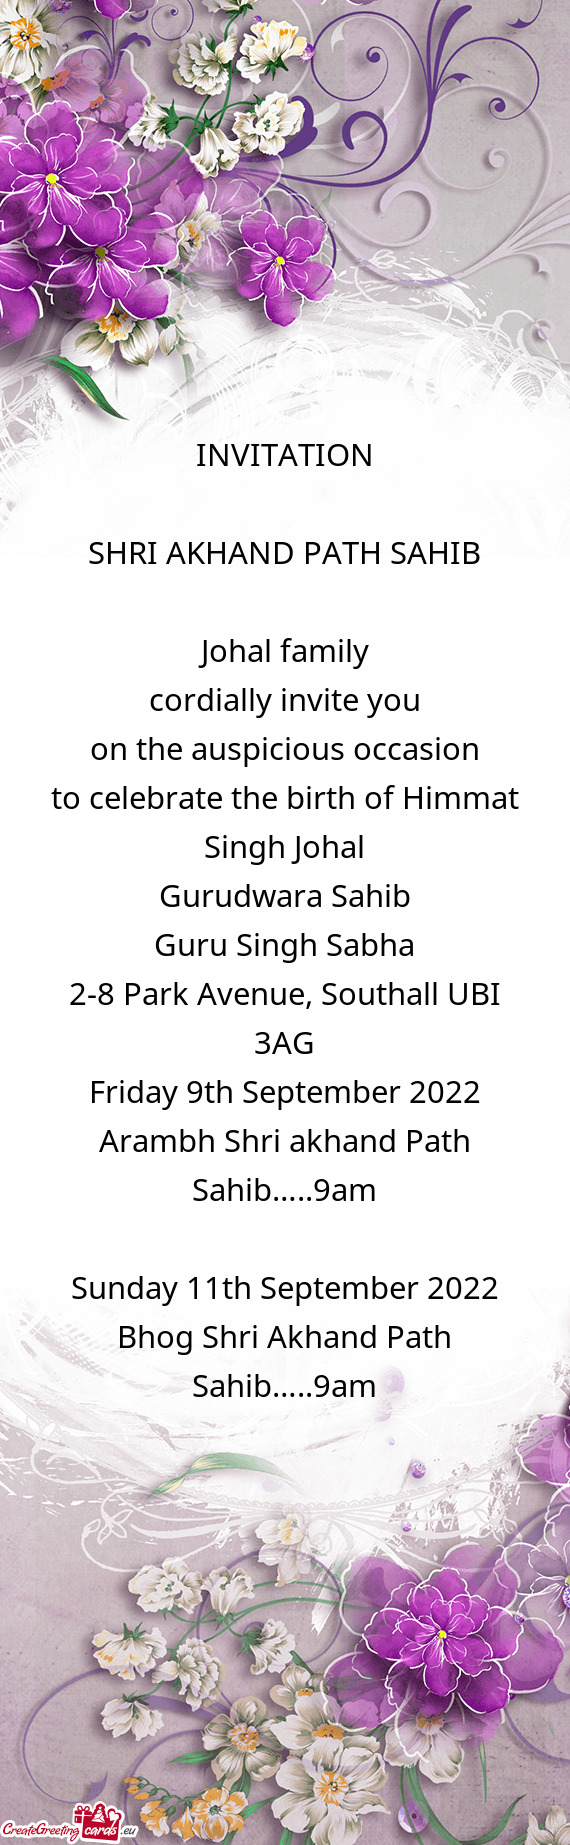 To celebrate the birth of Himmat Singh Johal